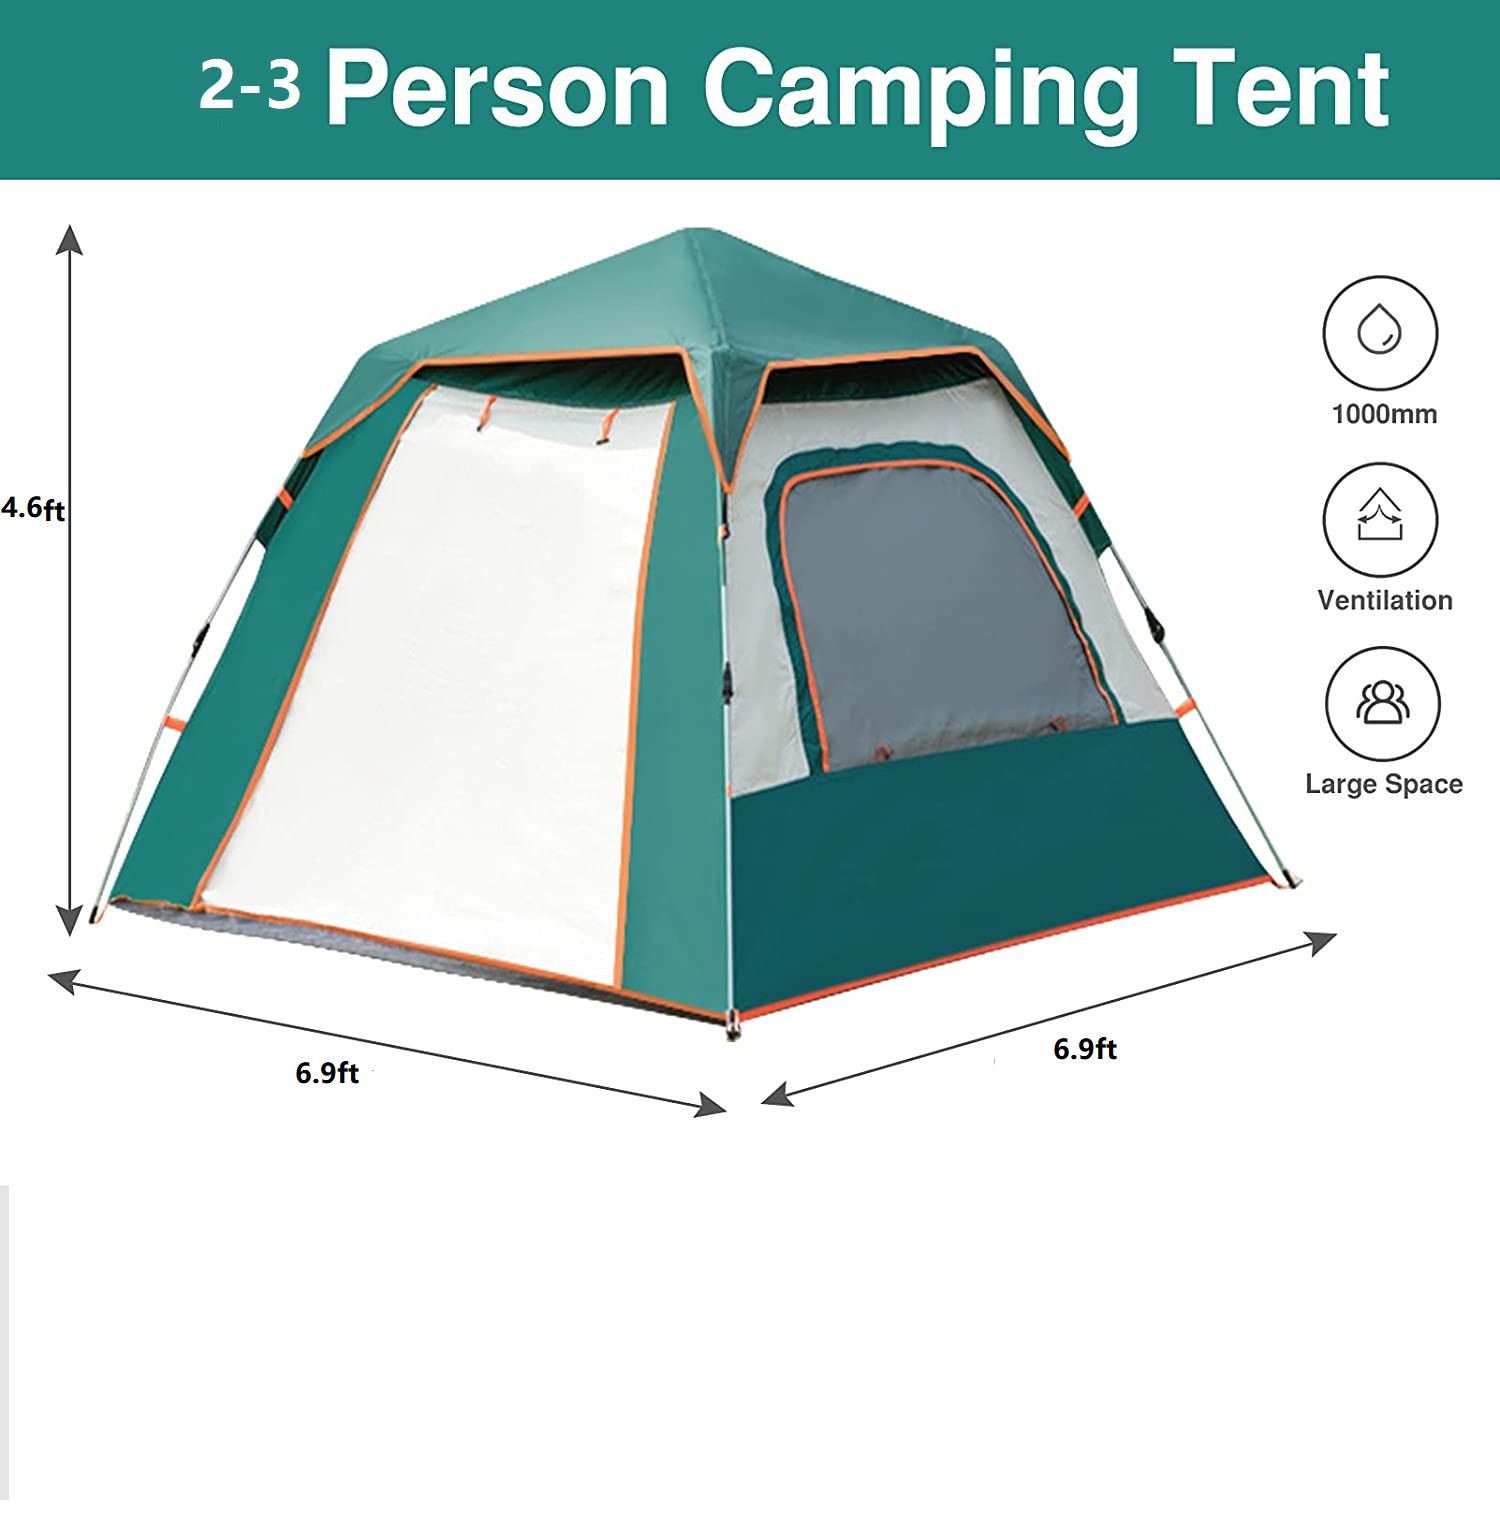 Pop Up Tents for Camping, 2/3/4/5 Person Family Cabin Tents, Waterproof, Double Layer, Big Tent for Outdoor,Picnic,Camping,Family,Friends Gathering - image 4 of 6